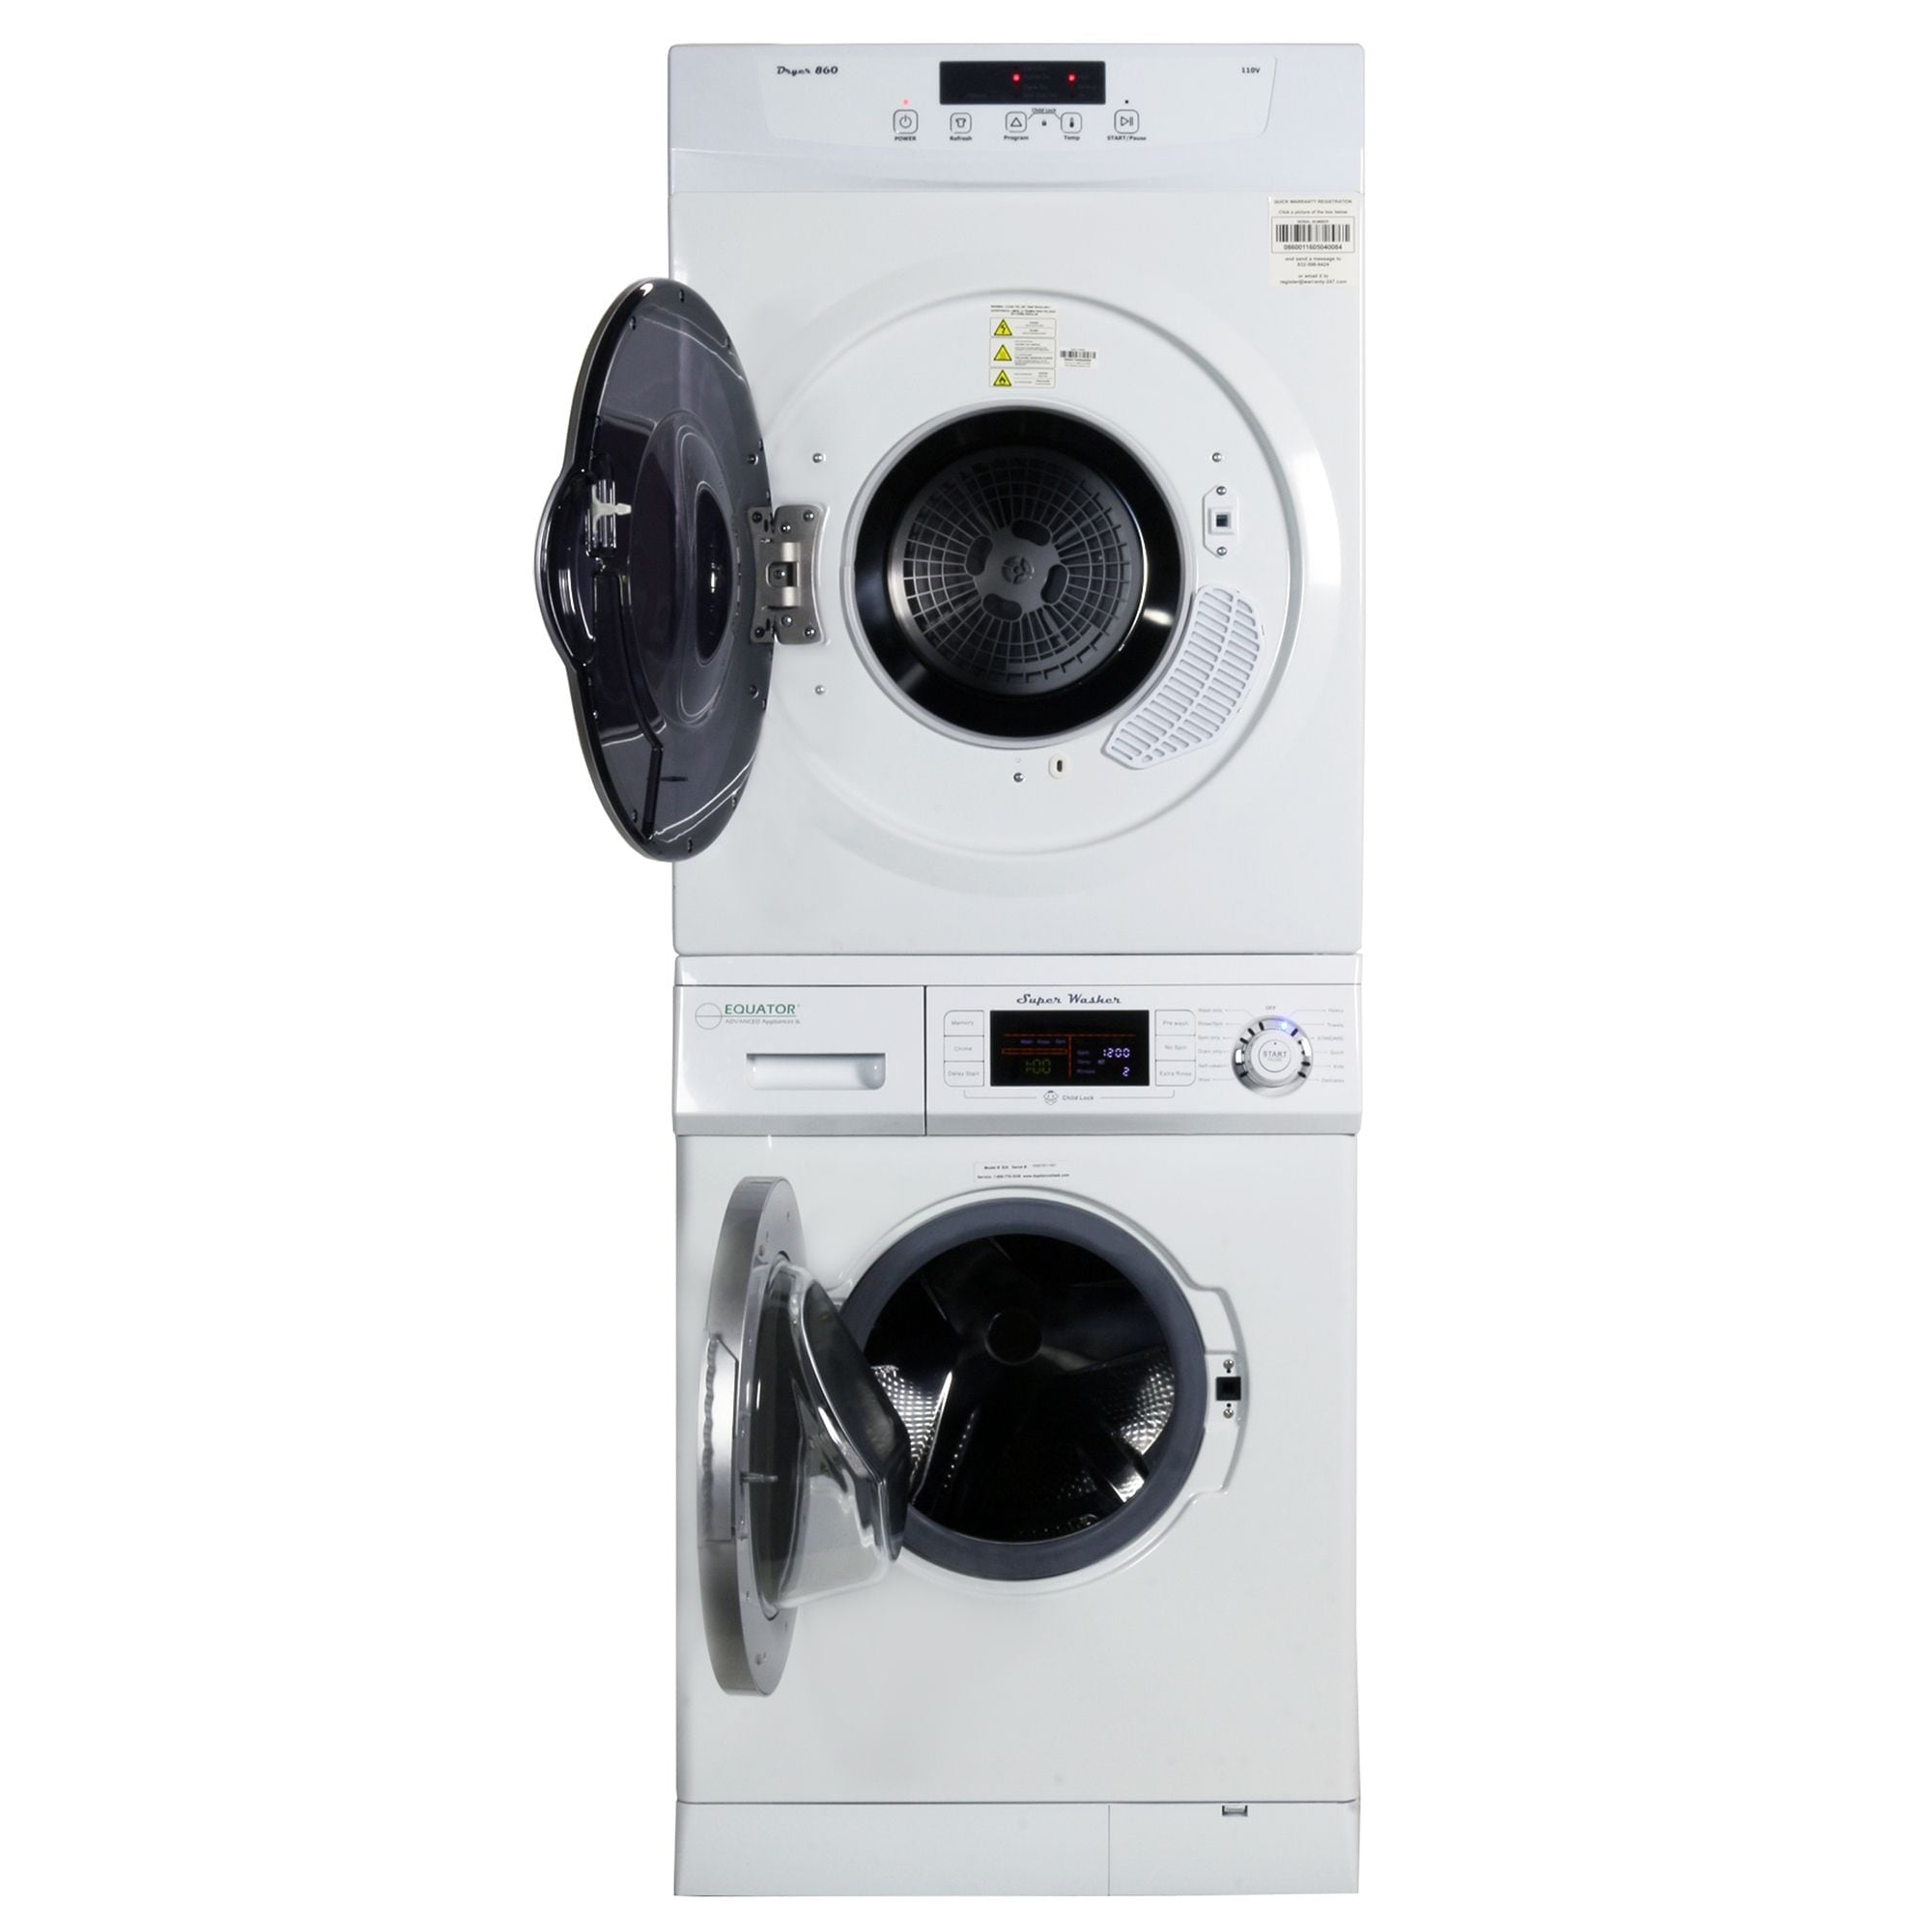 Equator ED860V 24 Inch Electric Dryer with 3.5 cu. ft. Capacity